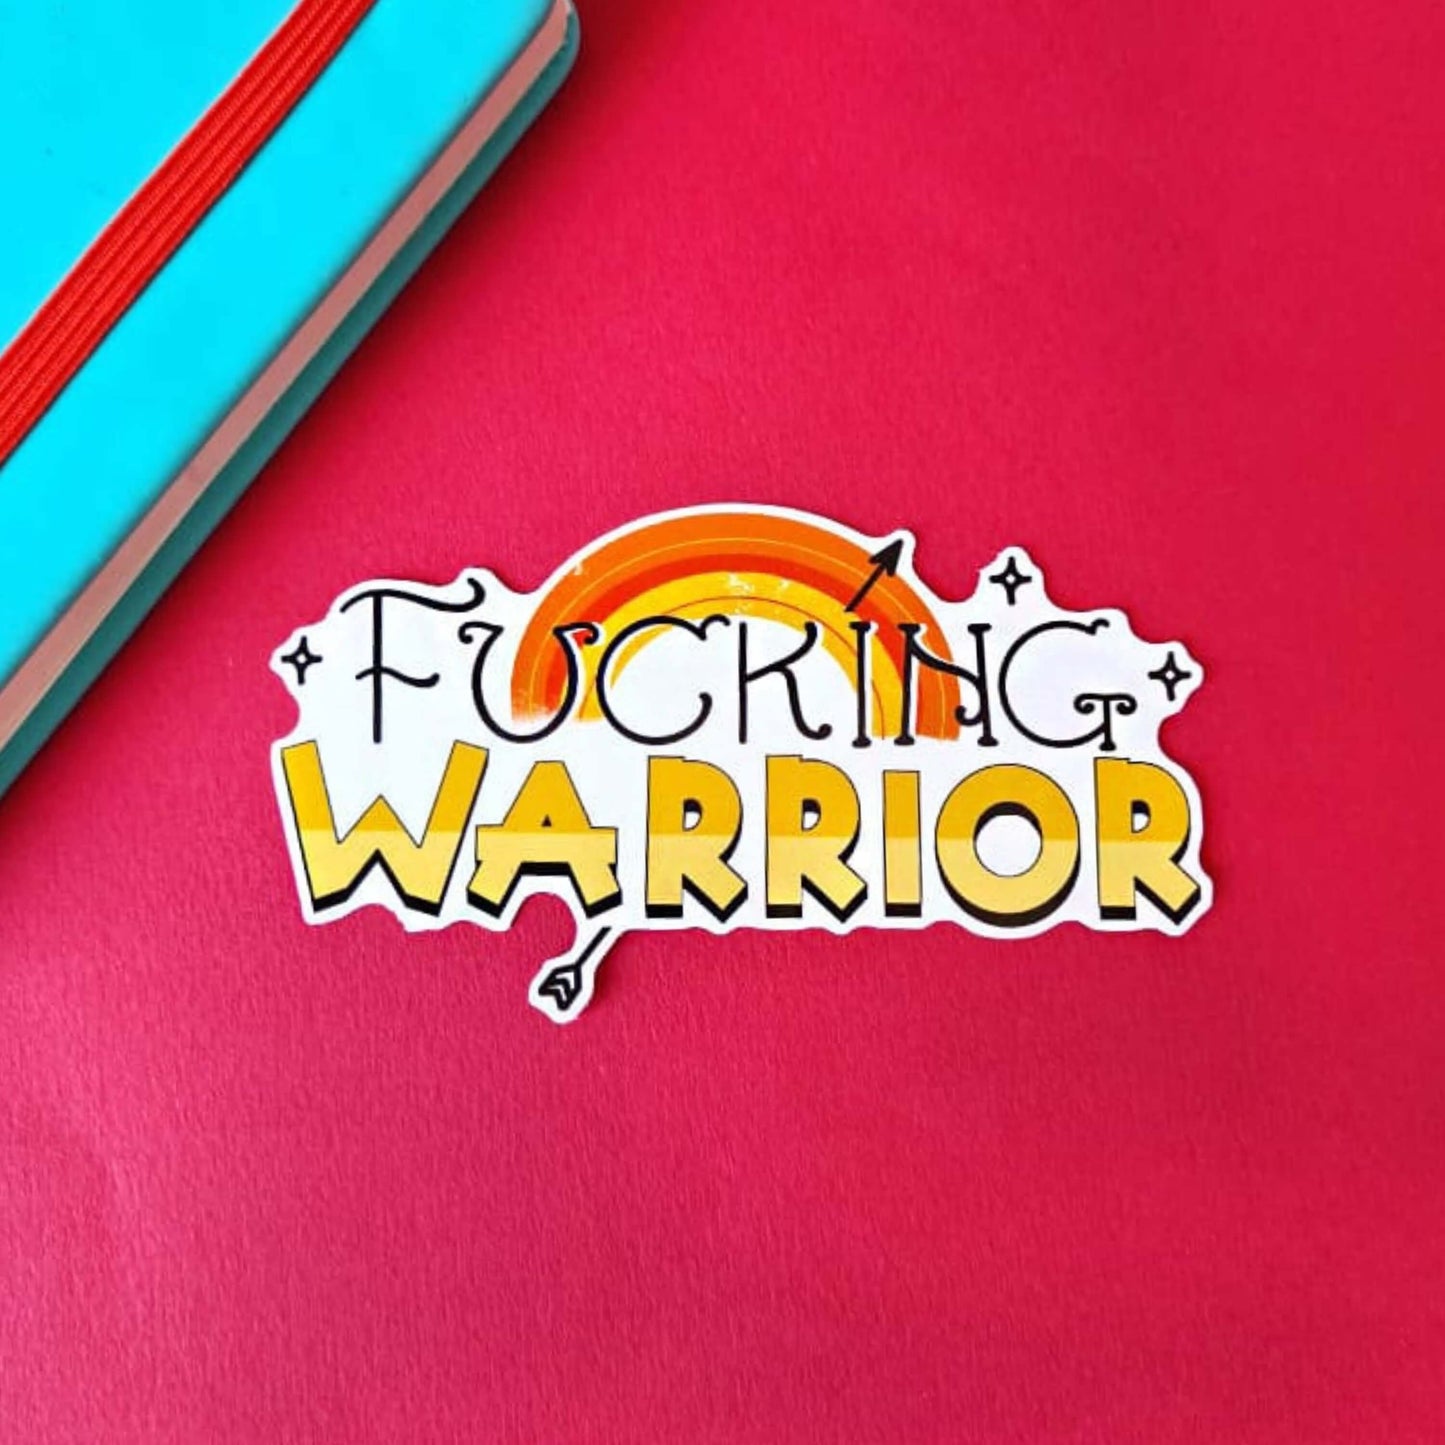 F***ing Warrior Sticker in yellow on a red, blue and green background with colouring pencils and red stripe candy bag. The sticker has top swirly black text reading 'fucking' and two tone yellow bold bottom text reading 'warrior', behind is a yellow rainbow with a black arrow going through and black sparkles surrounding.